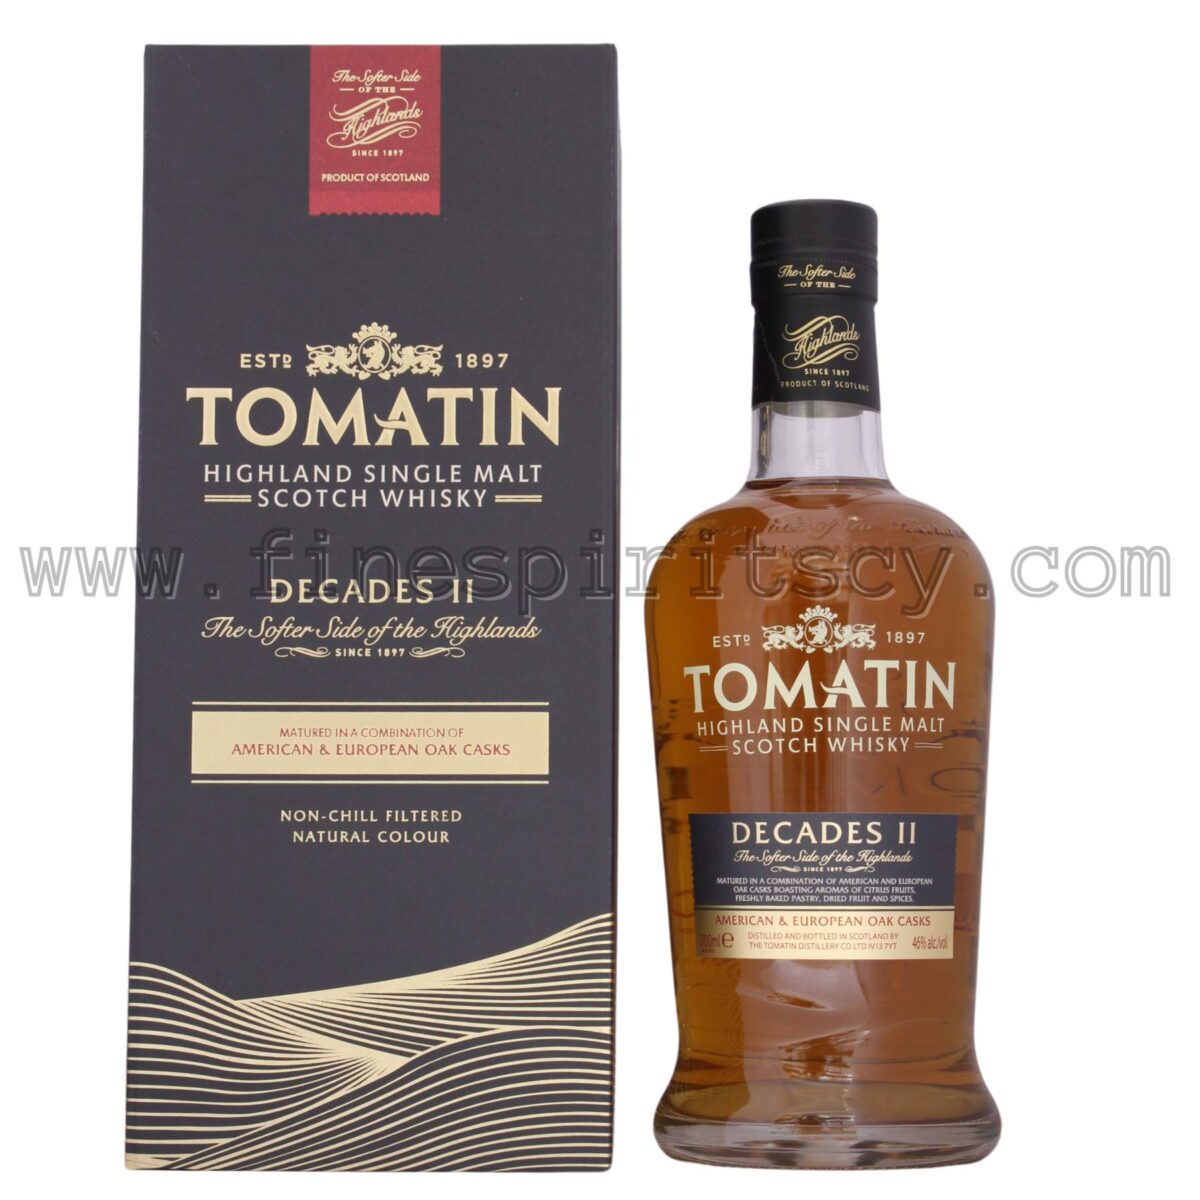 Tomatin Decades II 2 Whisky 50 year old Cyprus Price Fine Spirits Rare Best American European Cask